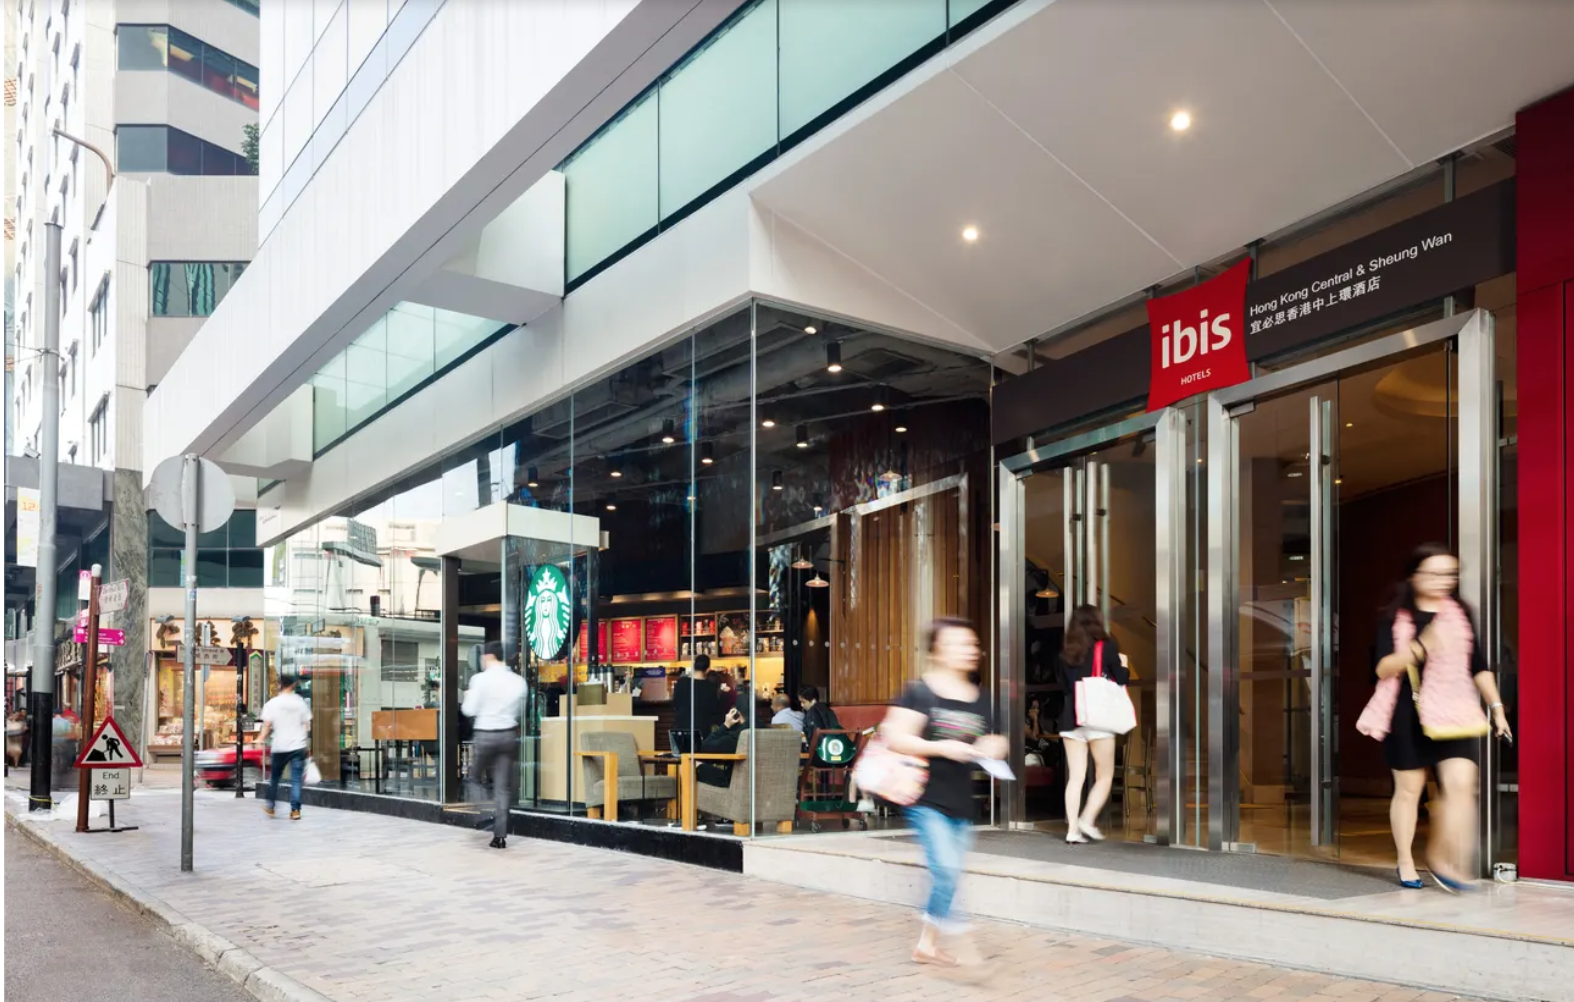 Ibis Hong Kong Central & Sheung Wan Hotel，宜必思香港中上環酒店-酒店外觀，staycation，酒店staycation